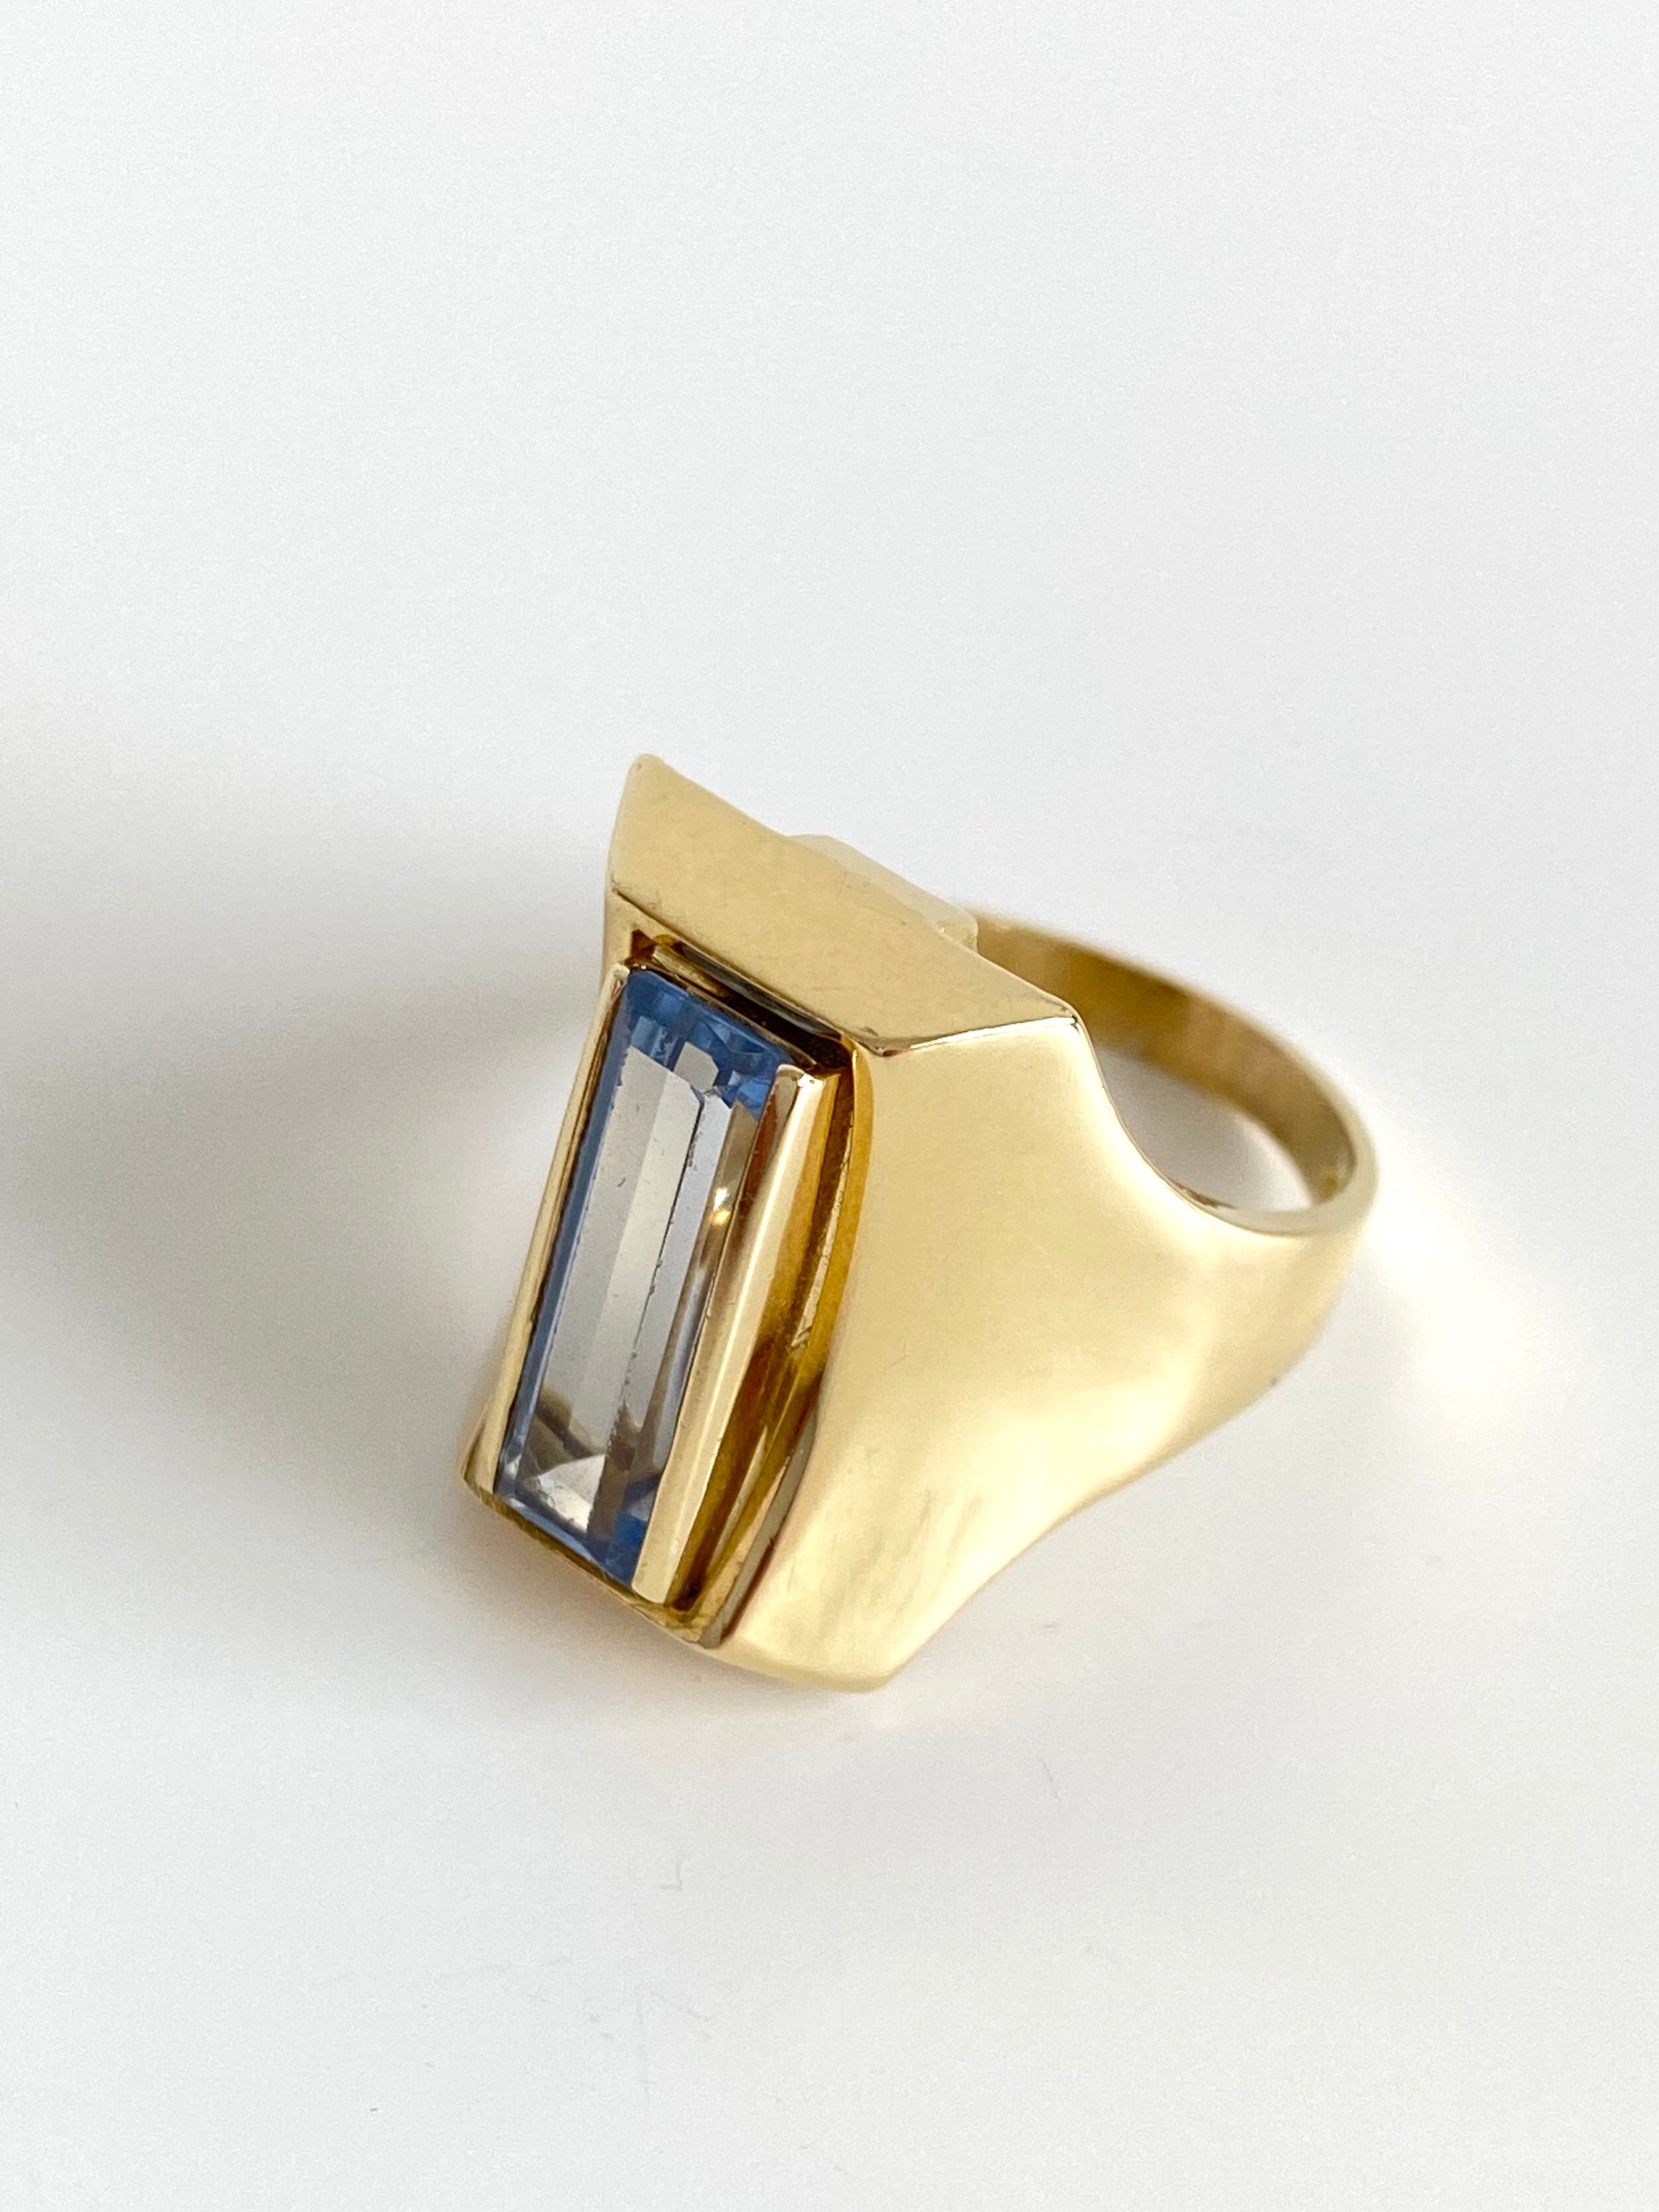 Vintage Blue Spinel Cocktail Ring, circa 1960's